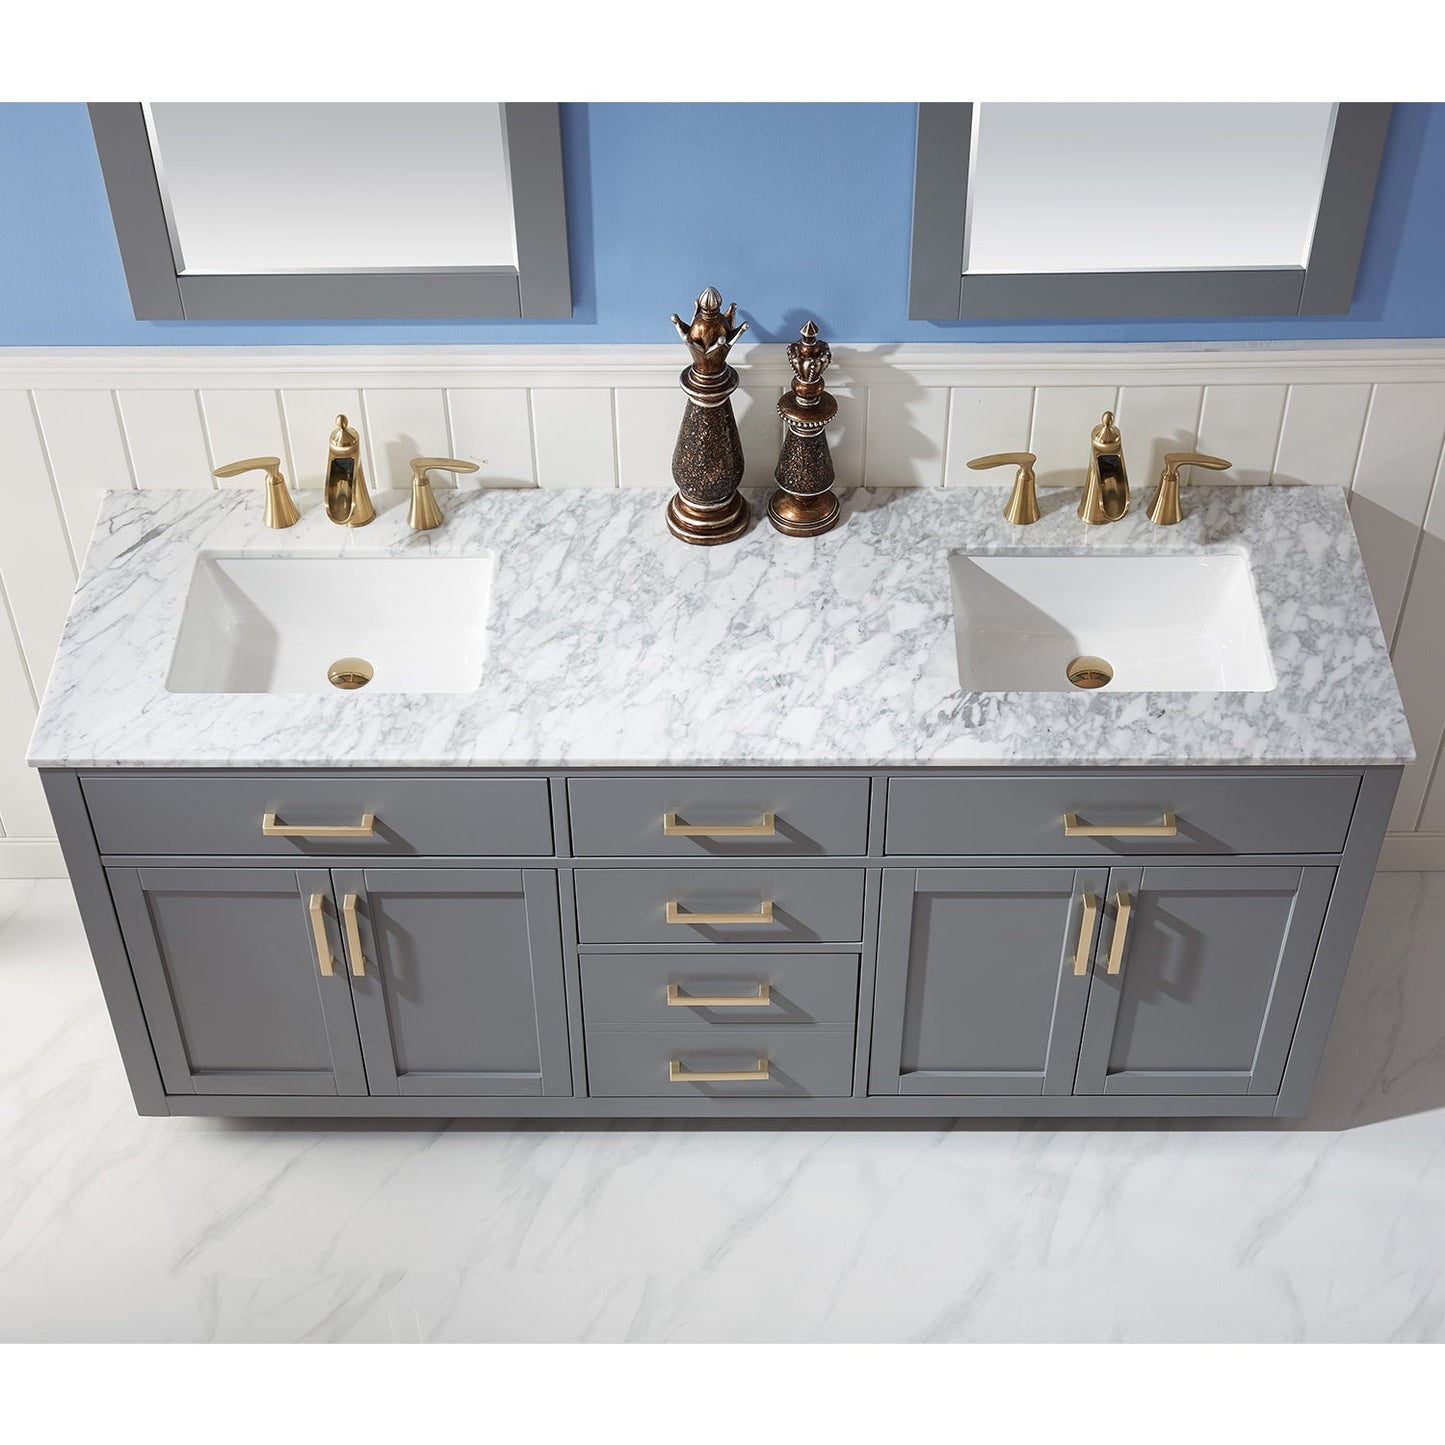 Ivy 72" Double Bathroom Vanity Set in Gray and Carrara White Marble Countertop with Mirror